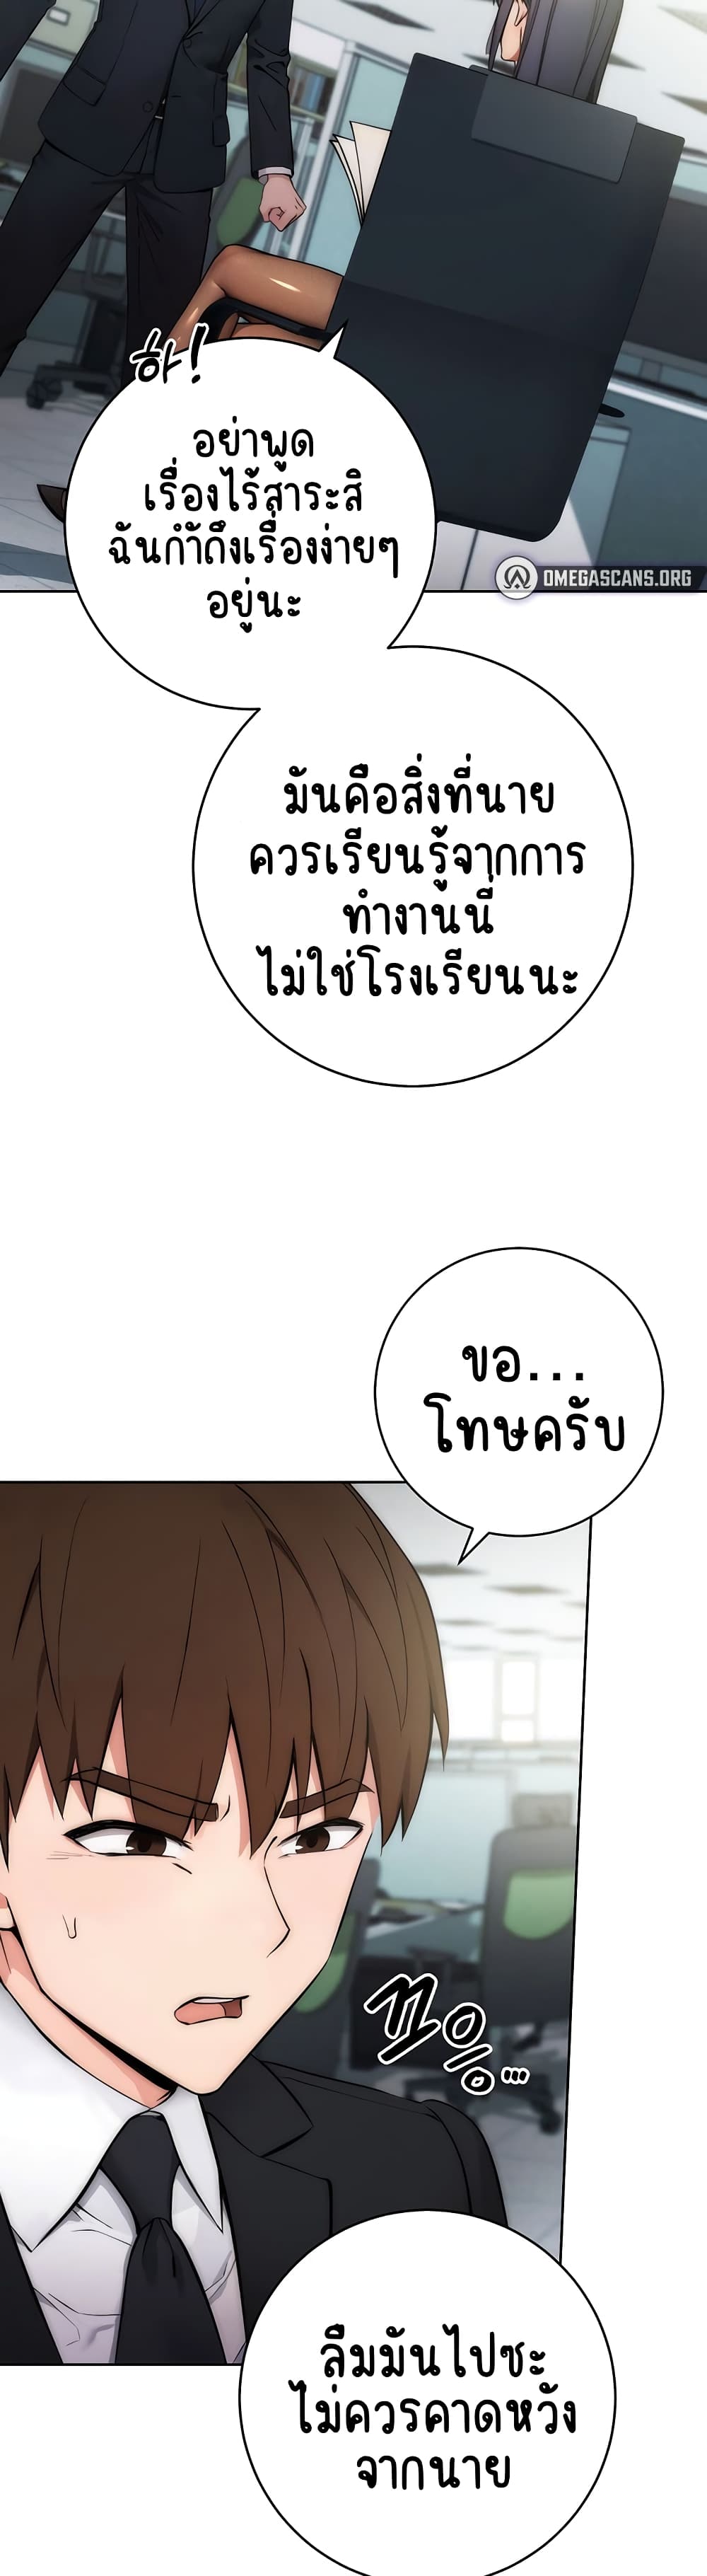 Outsider: The Invisible Man ตอนที่ 1 ภาพ 22